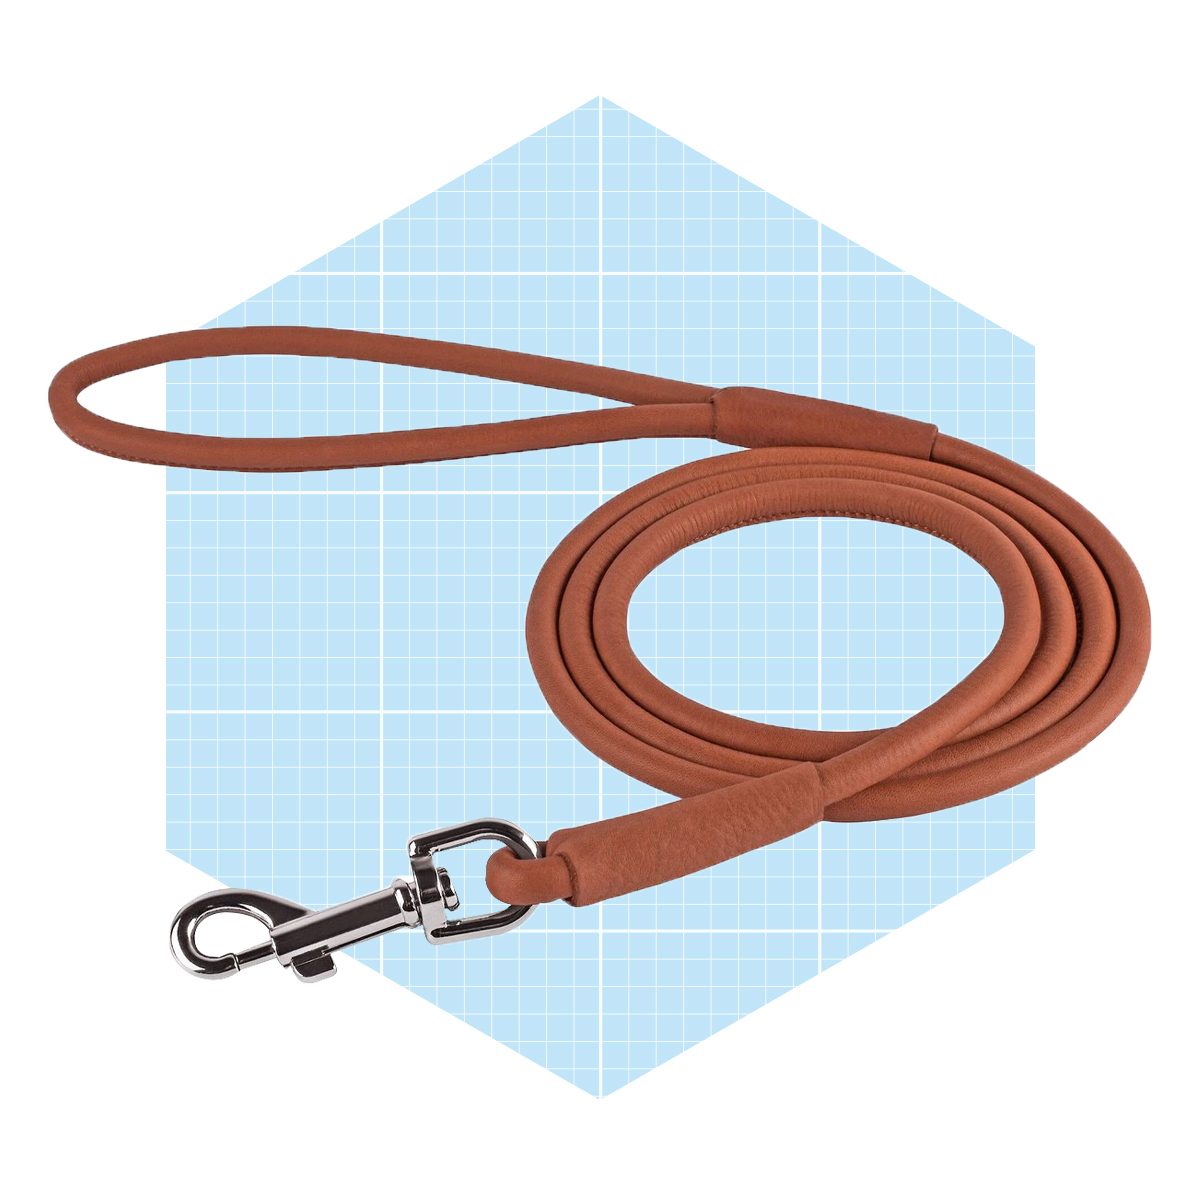 Collardirect Rolled Leather Dog Leash Ecomm Chewy.com